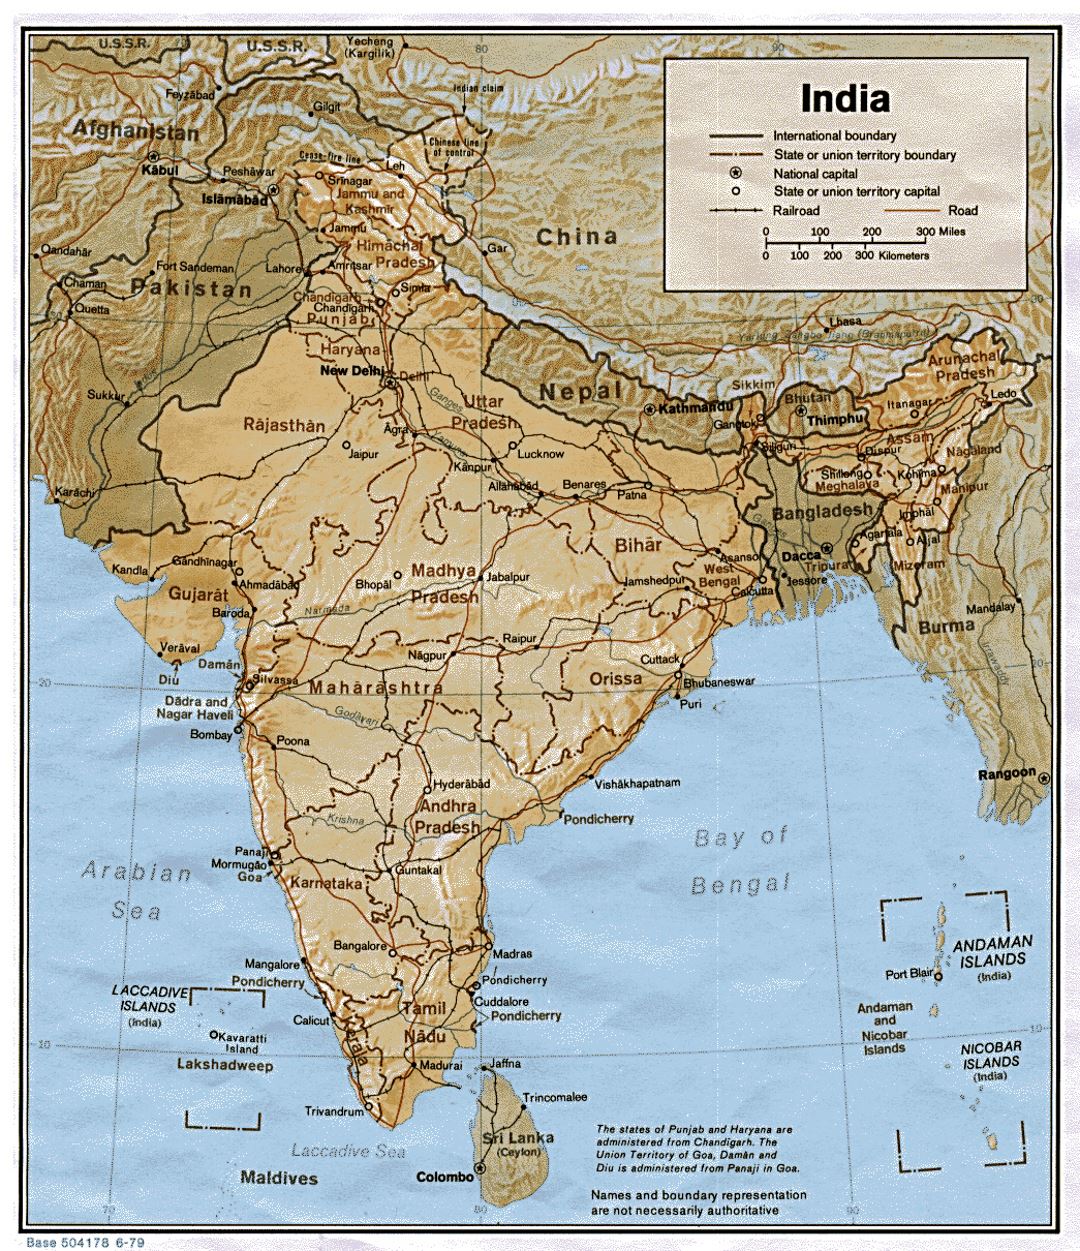 Detailed political and administrative map of India with relief, roads, railroads and major cities - 1979